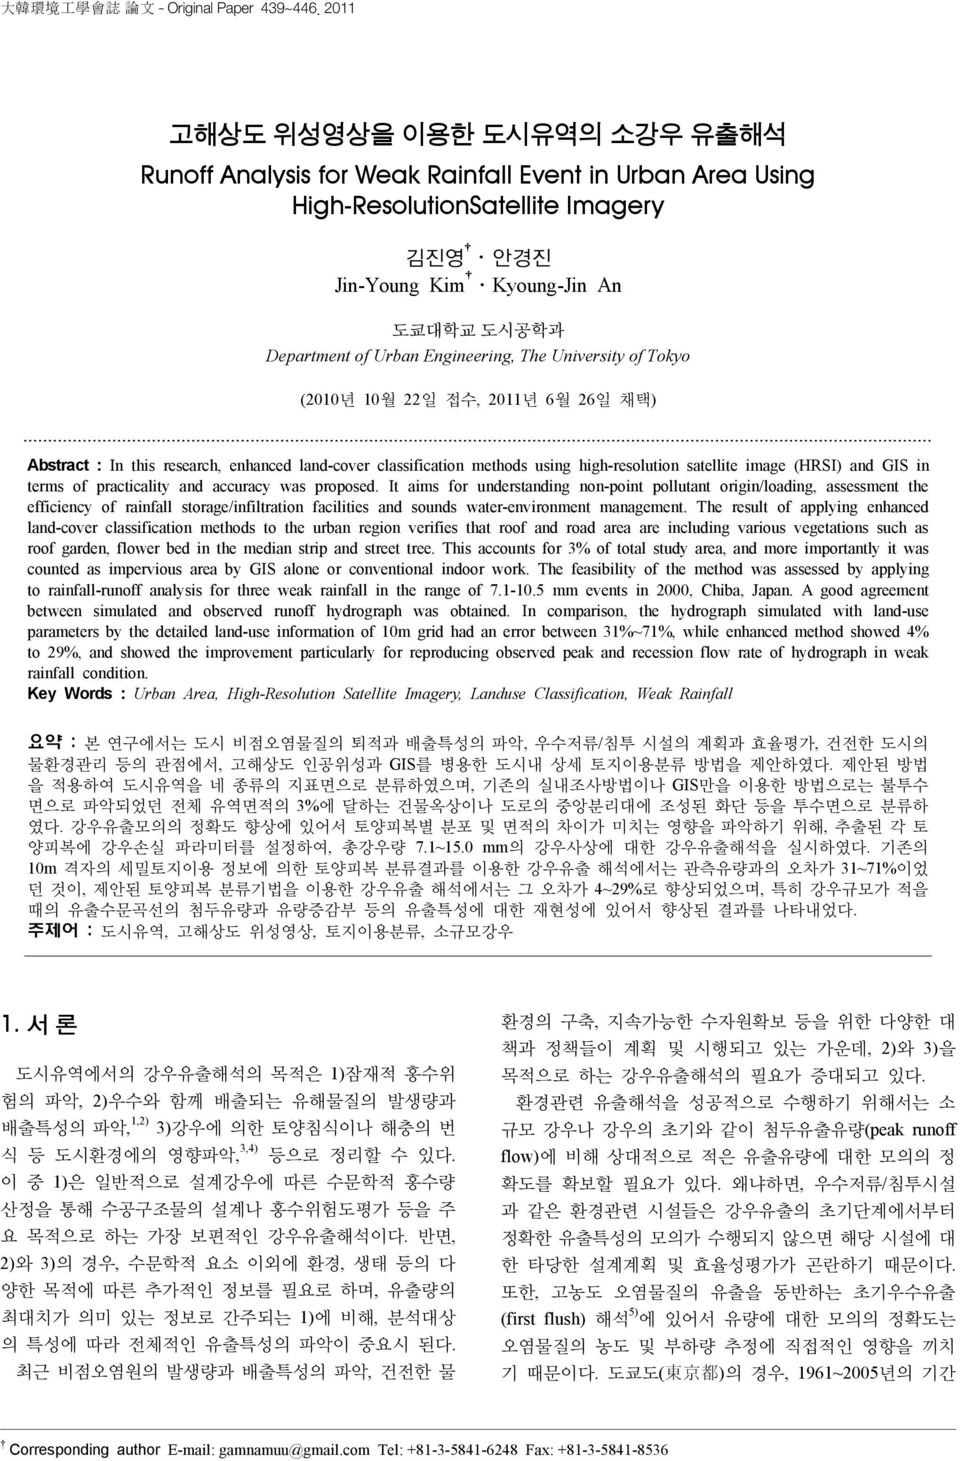 Engineering, The University of Tokyo (2010년 10월 22일 접수, 2011년 6월 26일 채택) Abstract : In this research, enhanced land-cover classification methods using high-resolution satellite image (HRSI) and GIS